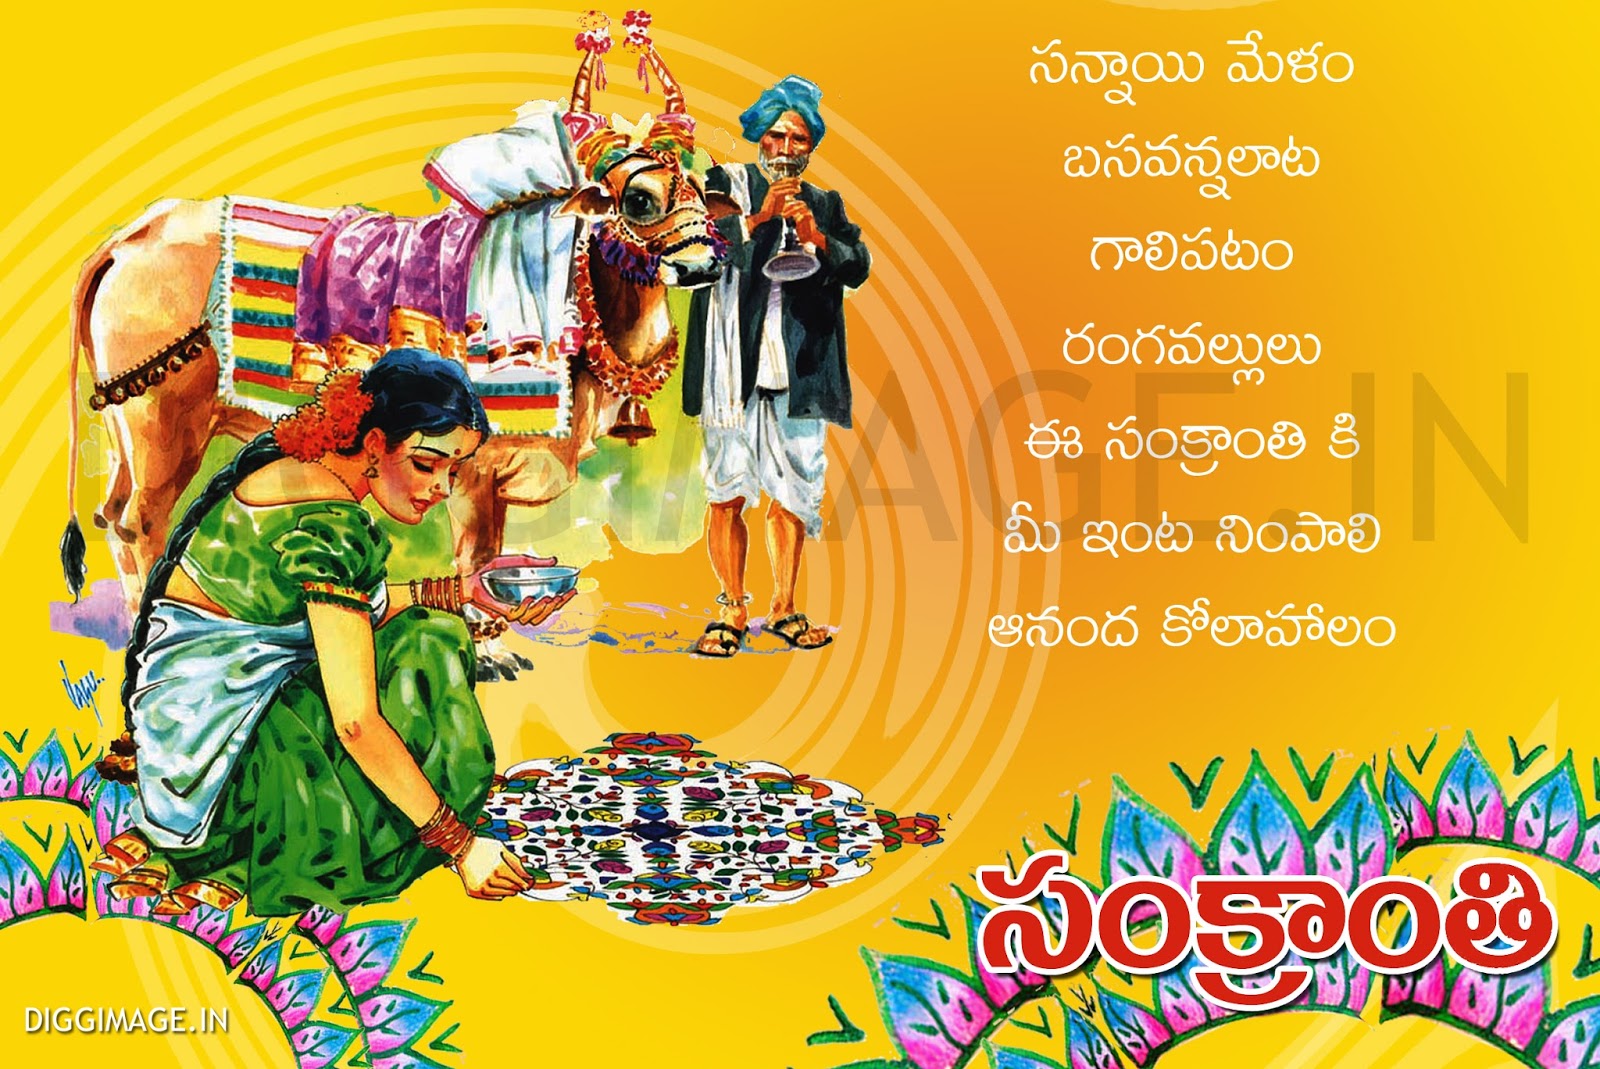 sankranthi-wishes-in-telugu-with-lovable-message-2017-d-i-g-g-i-m-a-g-e